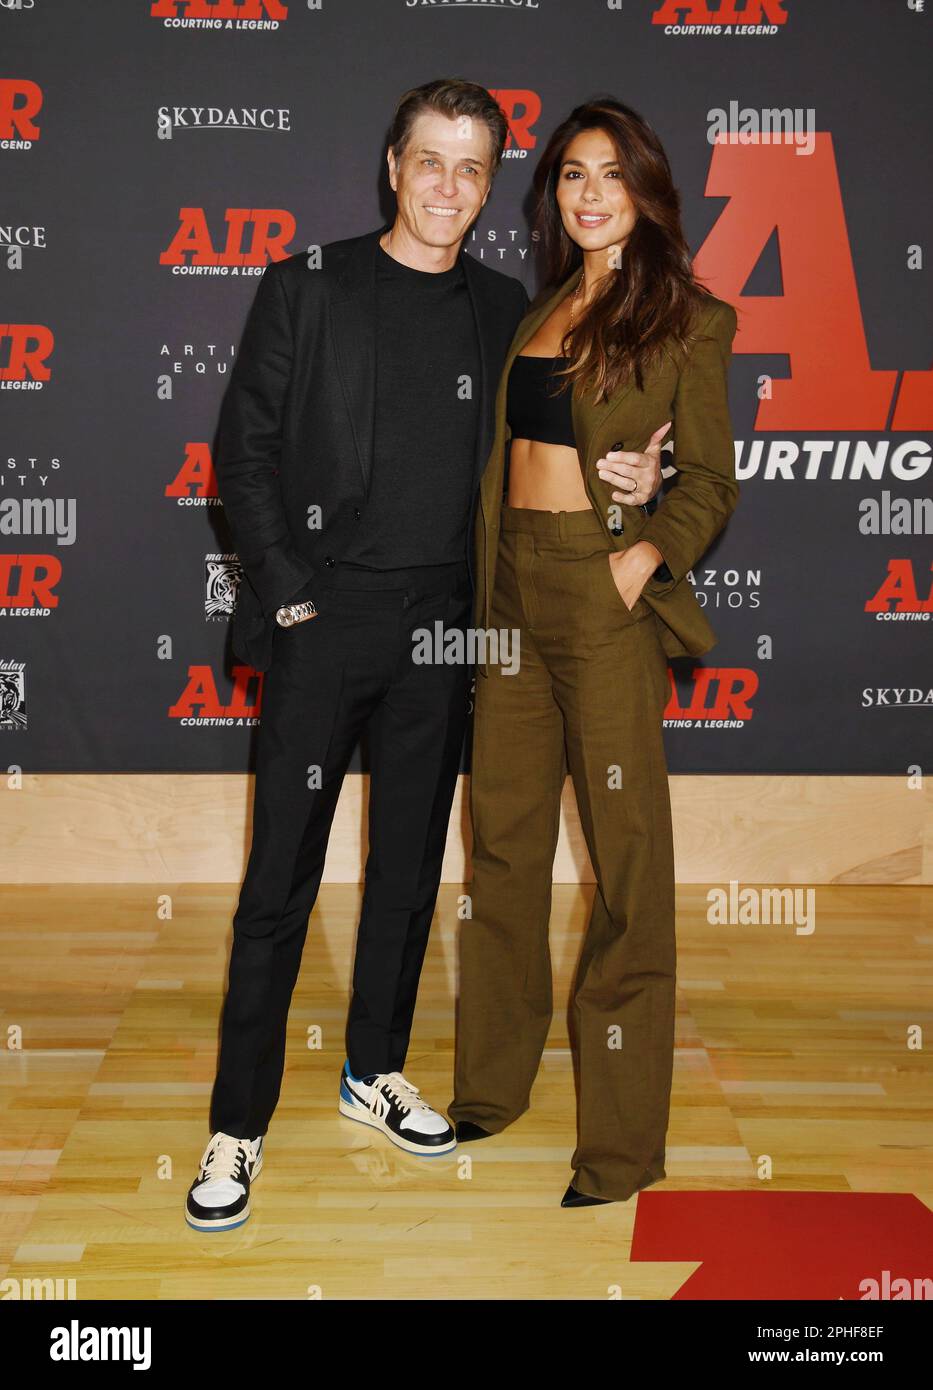 LOS ANGELES, CALIFORNIA - MARCH 27: (L-R) Patrick Whitesell and Pia Miller Whitsell attend Amazon Studios' World Premiere Of 'AIR' at Regency Village Stock Photo